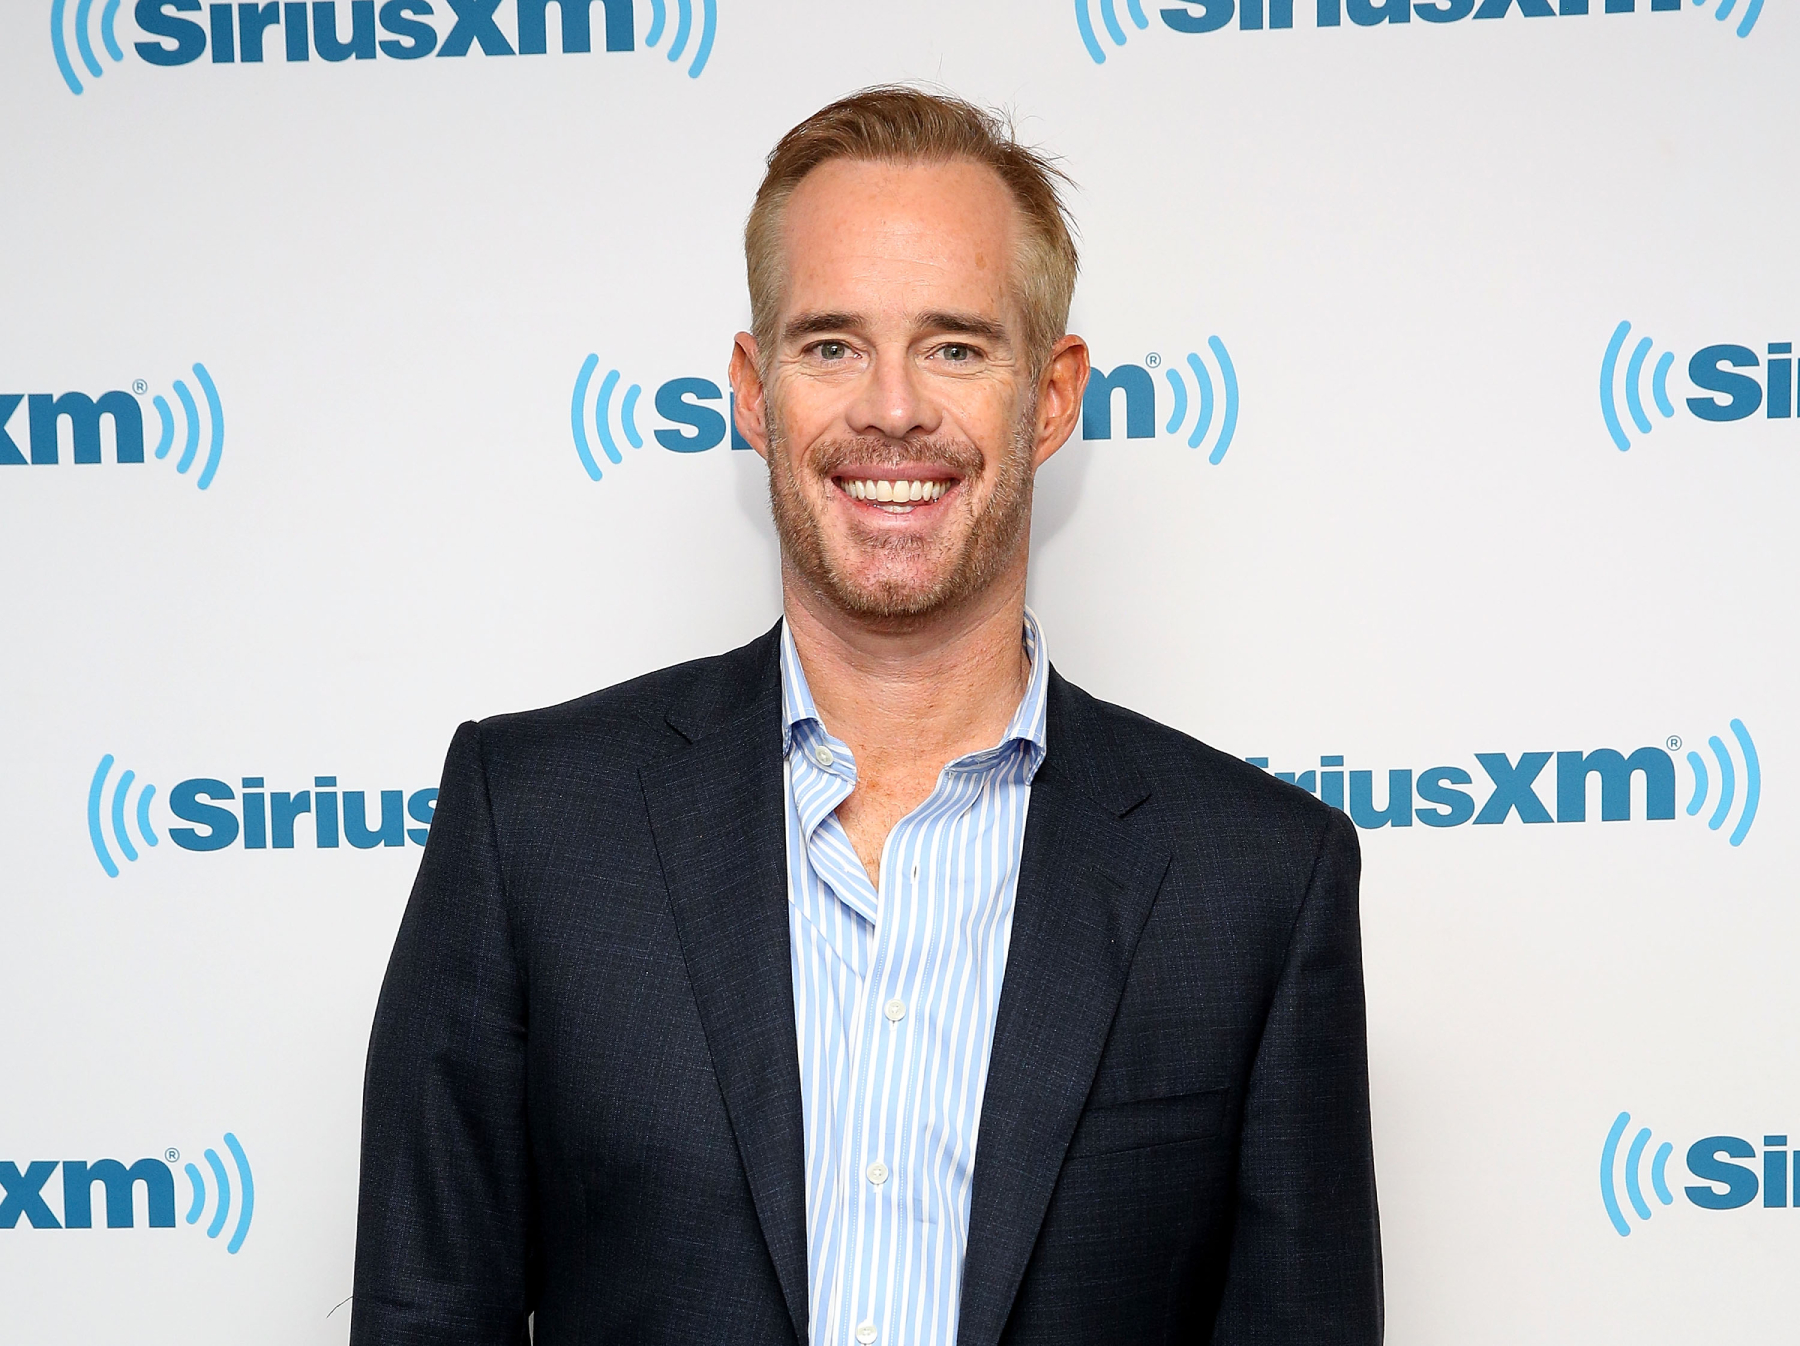 Joe Buck is one of the most famous broadcasters in sports. The job isn't always easy, though, as he has called a touchdown while peeing.